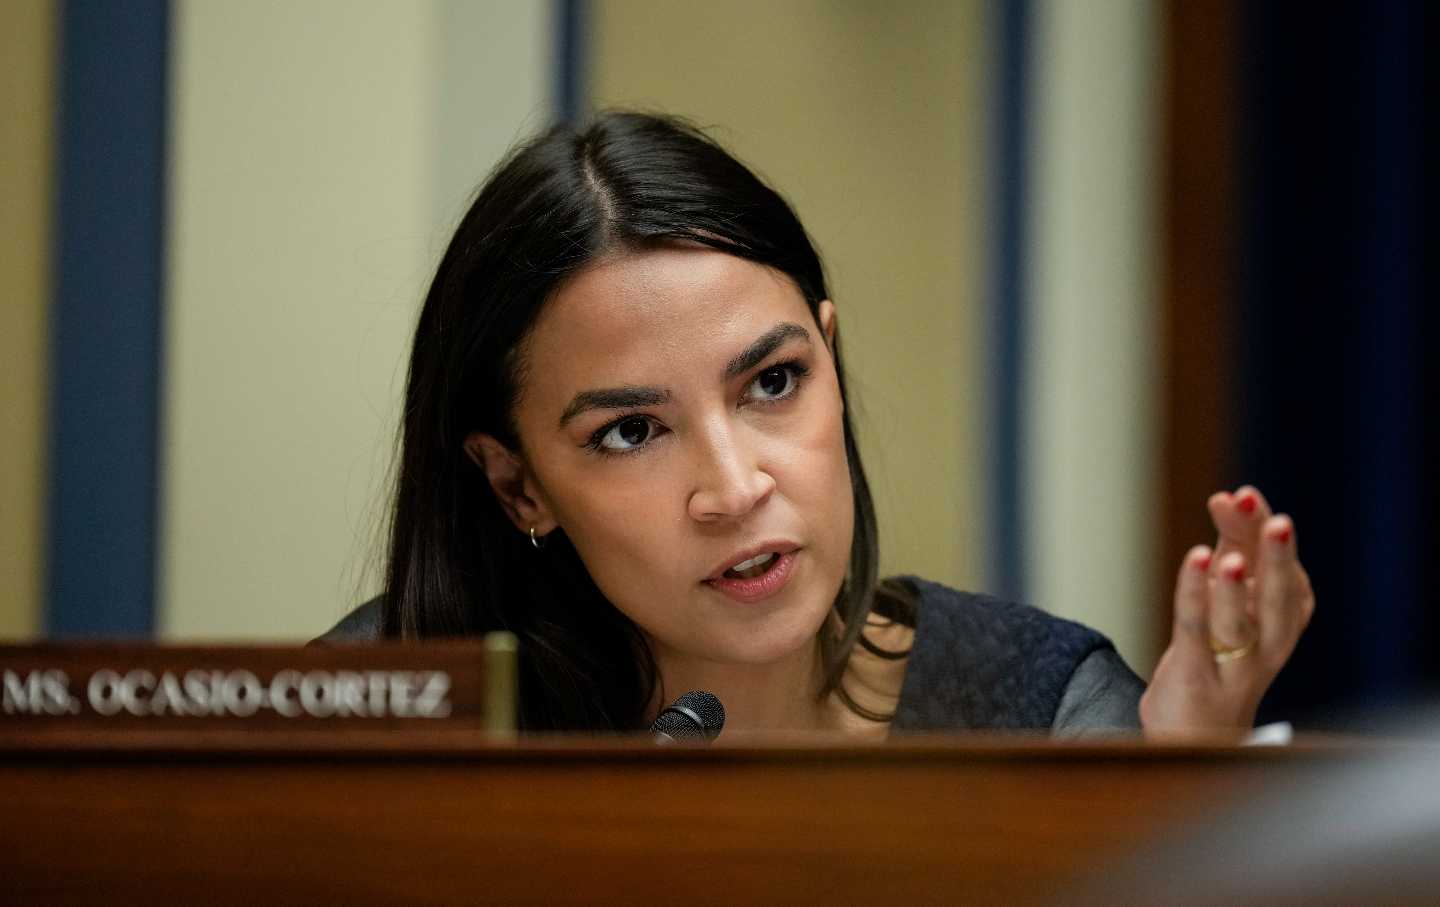 A Longtime Political Organizer in AOC’s District Says She’s the Real Deal